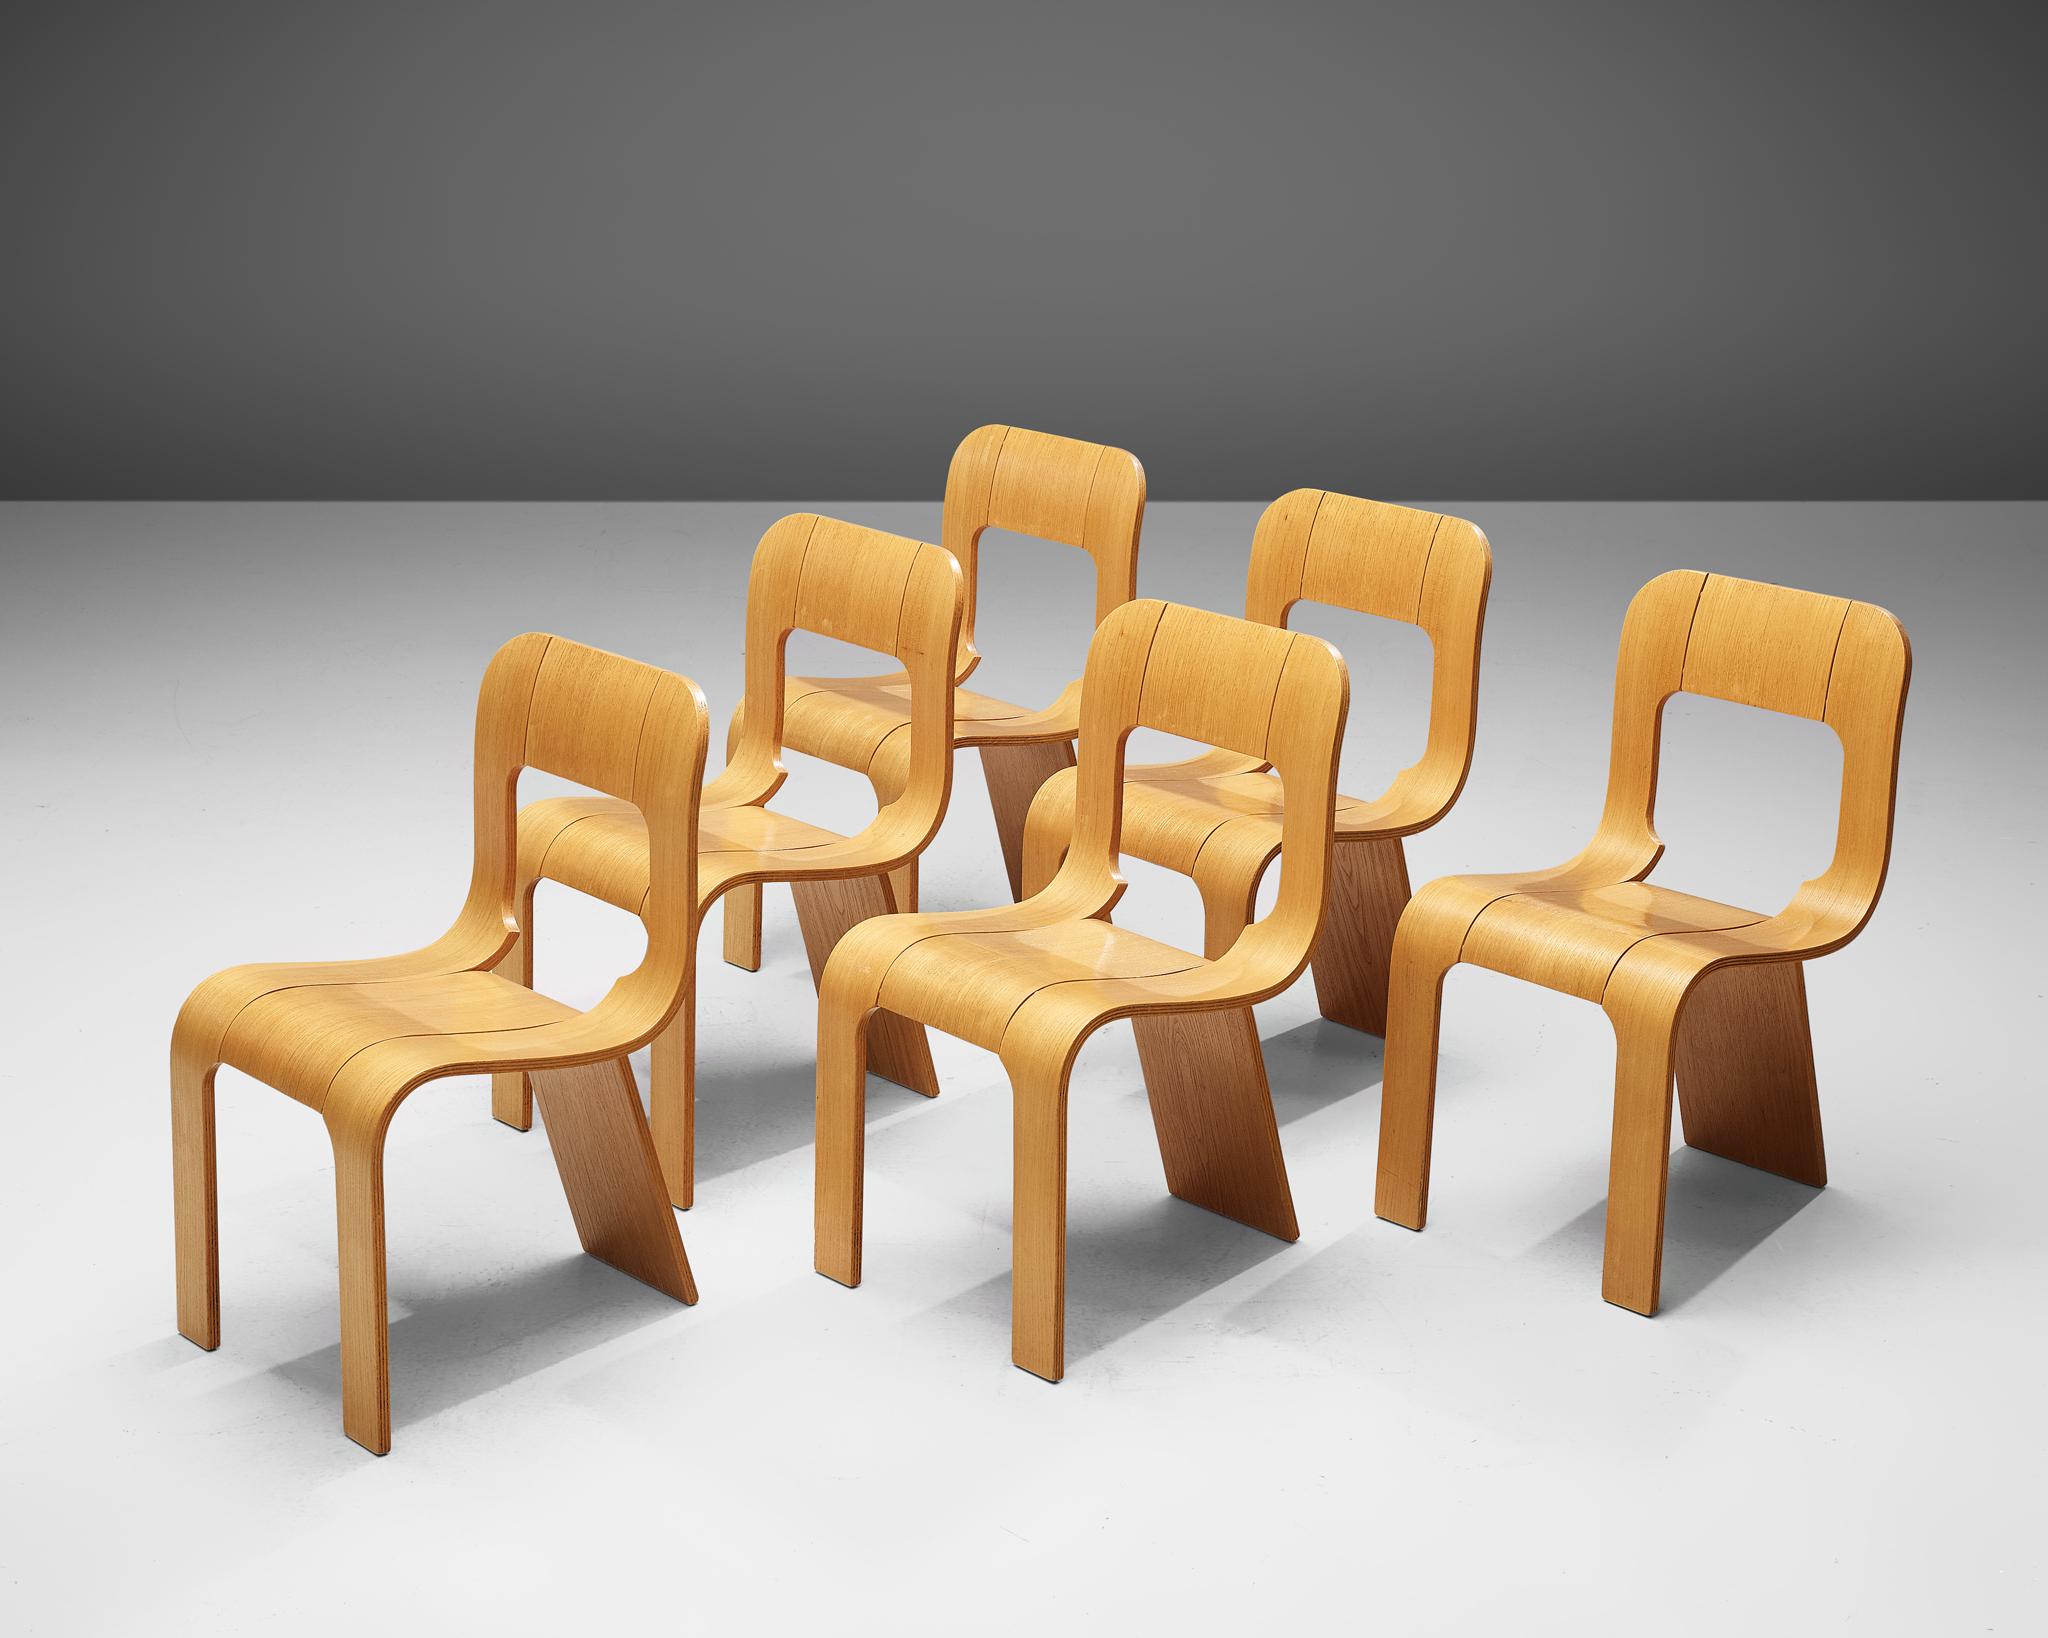 Gigi Sabadin for Stilwood, set of six chairs, plywood, Italy, 1970s.

An inventive design by the Italian Gigi Sabadin, these chairs are made of bent plywood with a veneered finish. The organic design seems to be made of one piece, which is cut and